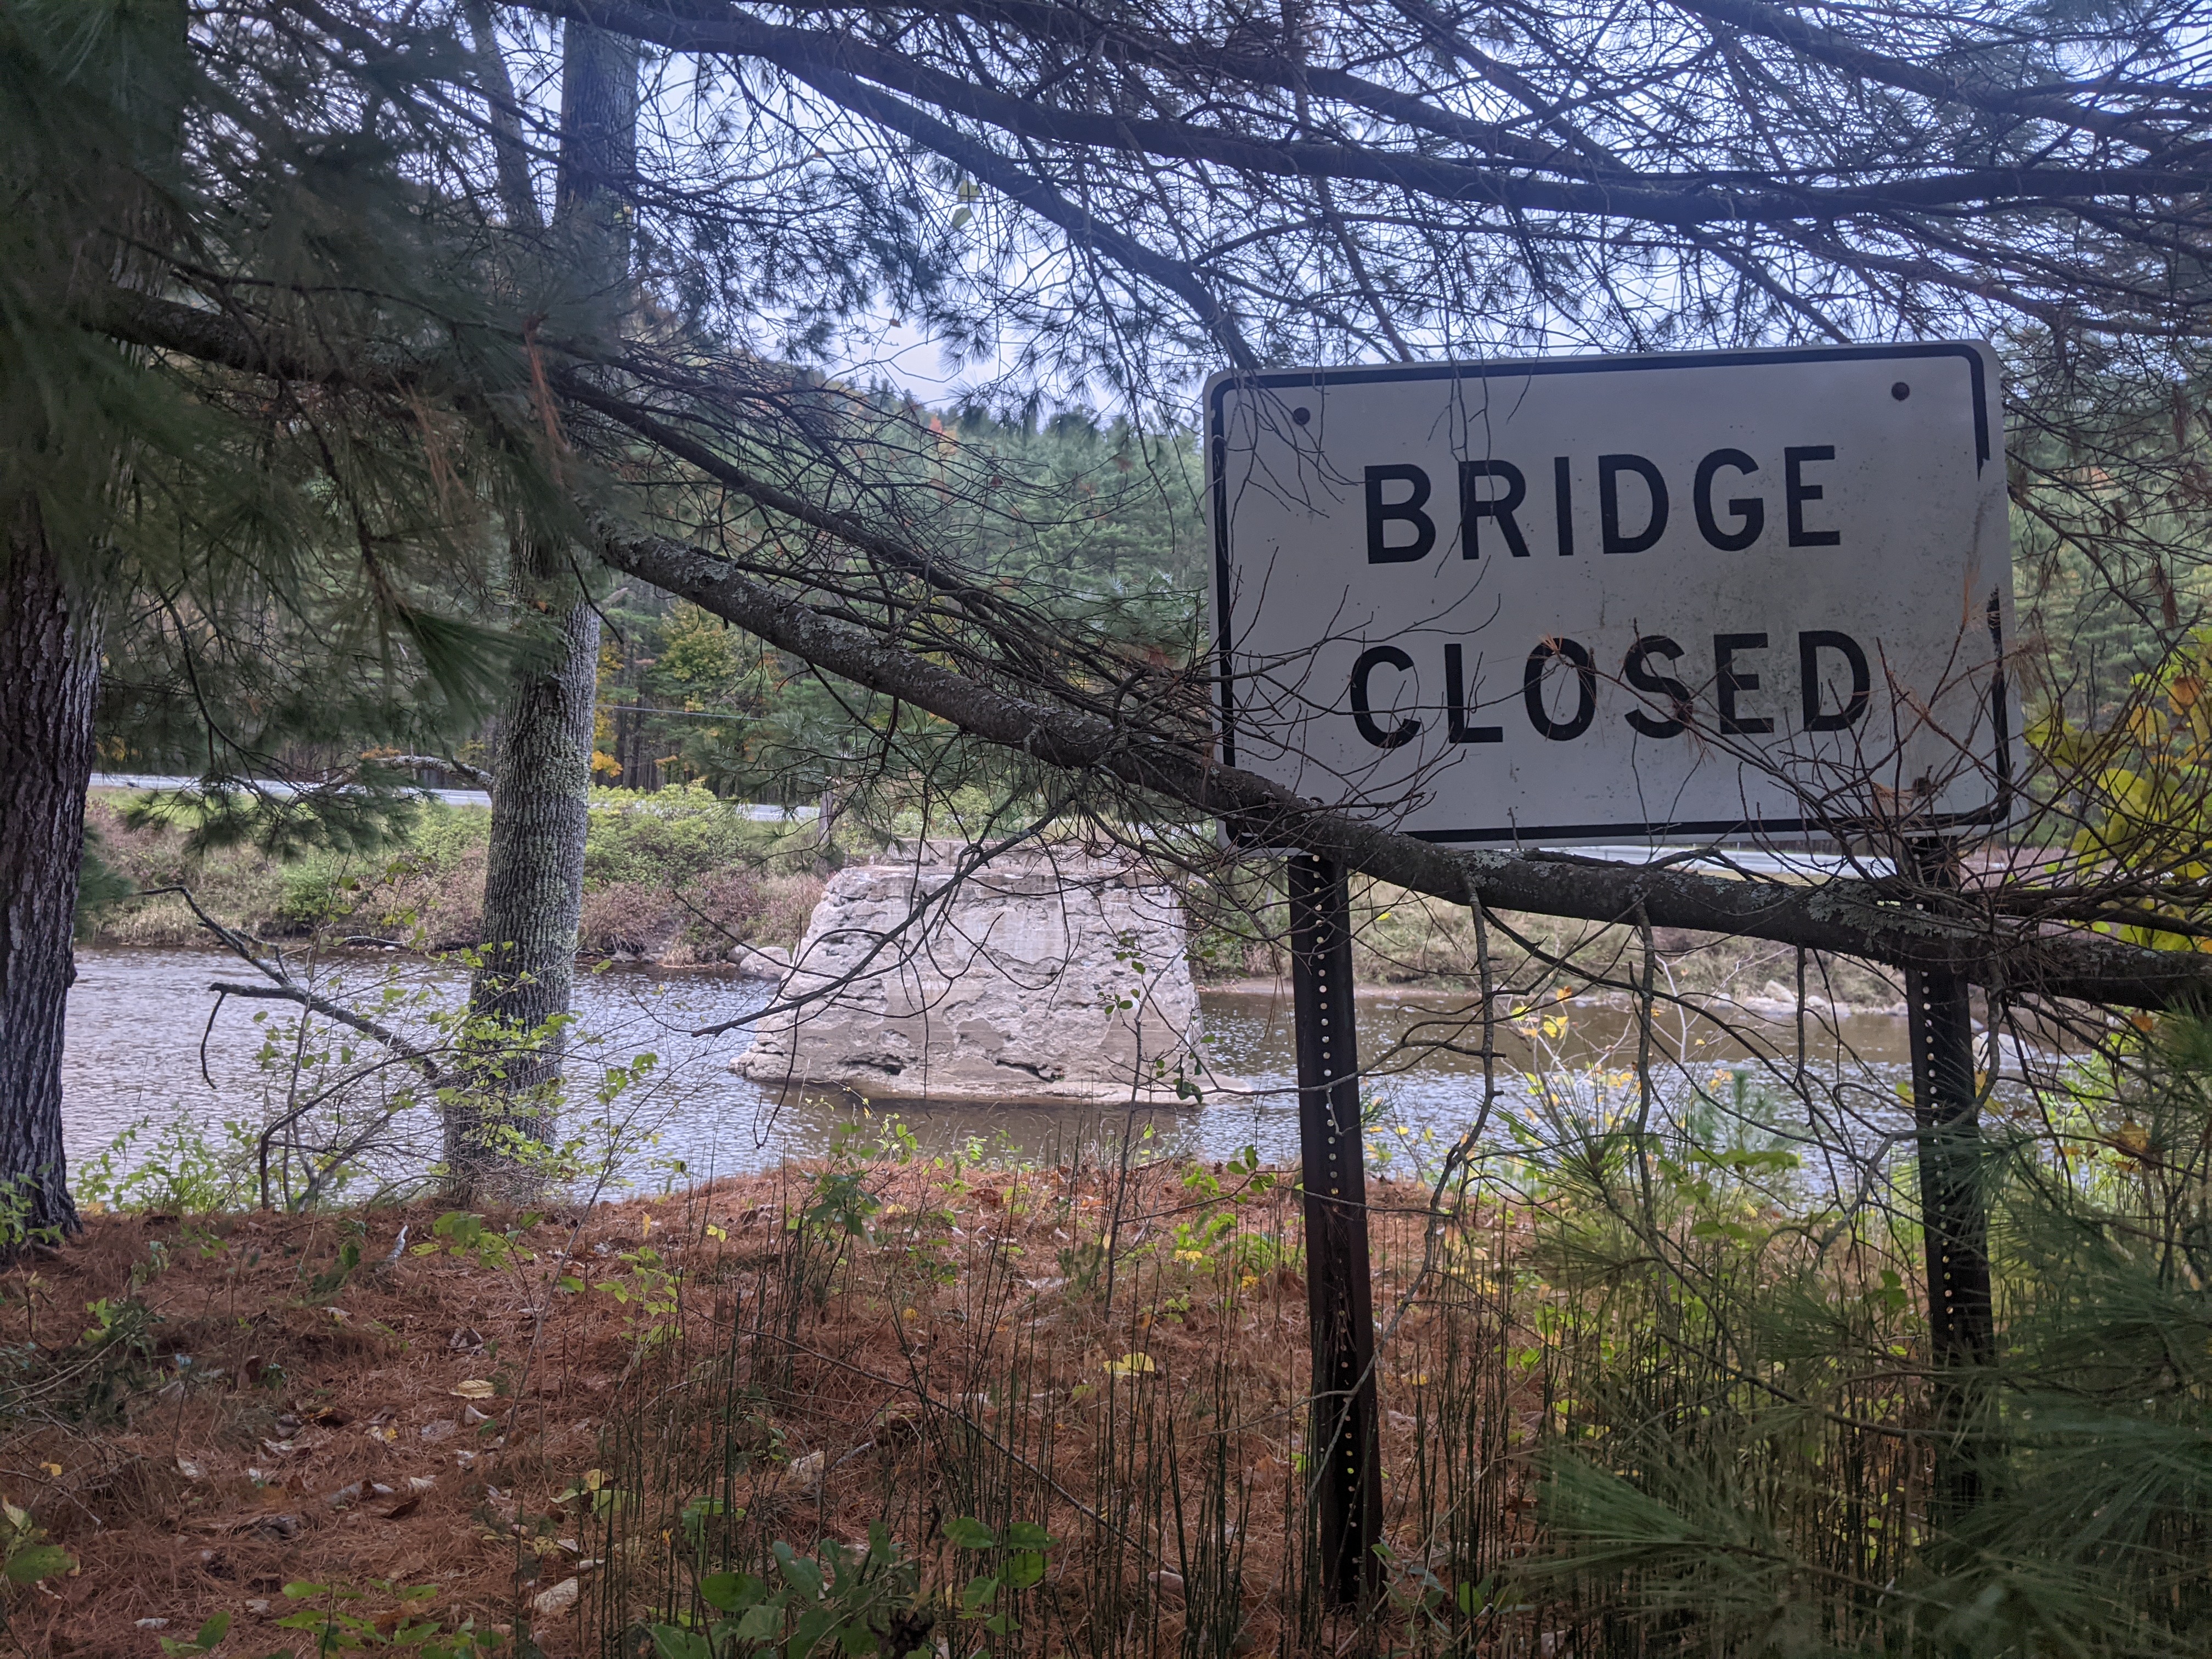 A sign reading 'BRIDGE CLOSED,' in front of a river with one concrete pillar in the middle that appears to have once upon a time supported a bridge. There is a mild overgrowth of tree branches in the foreground.